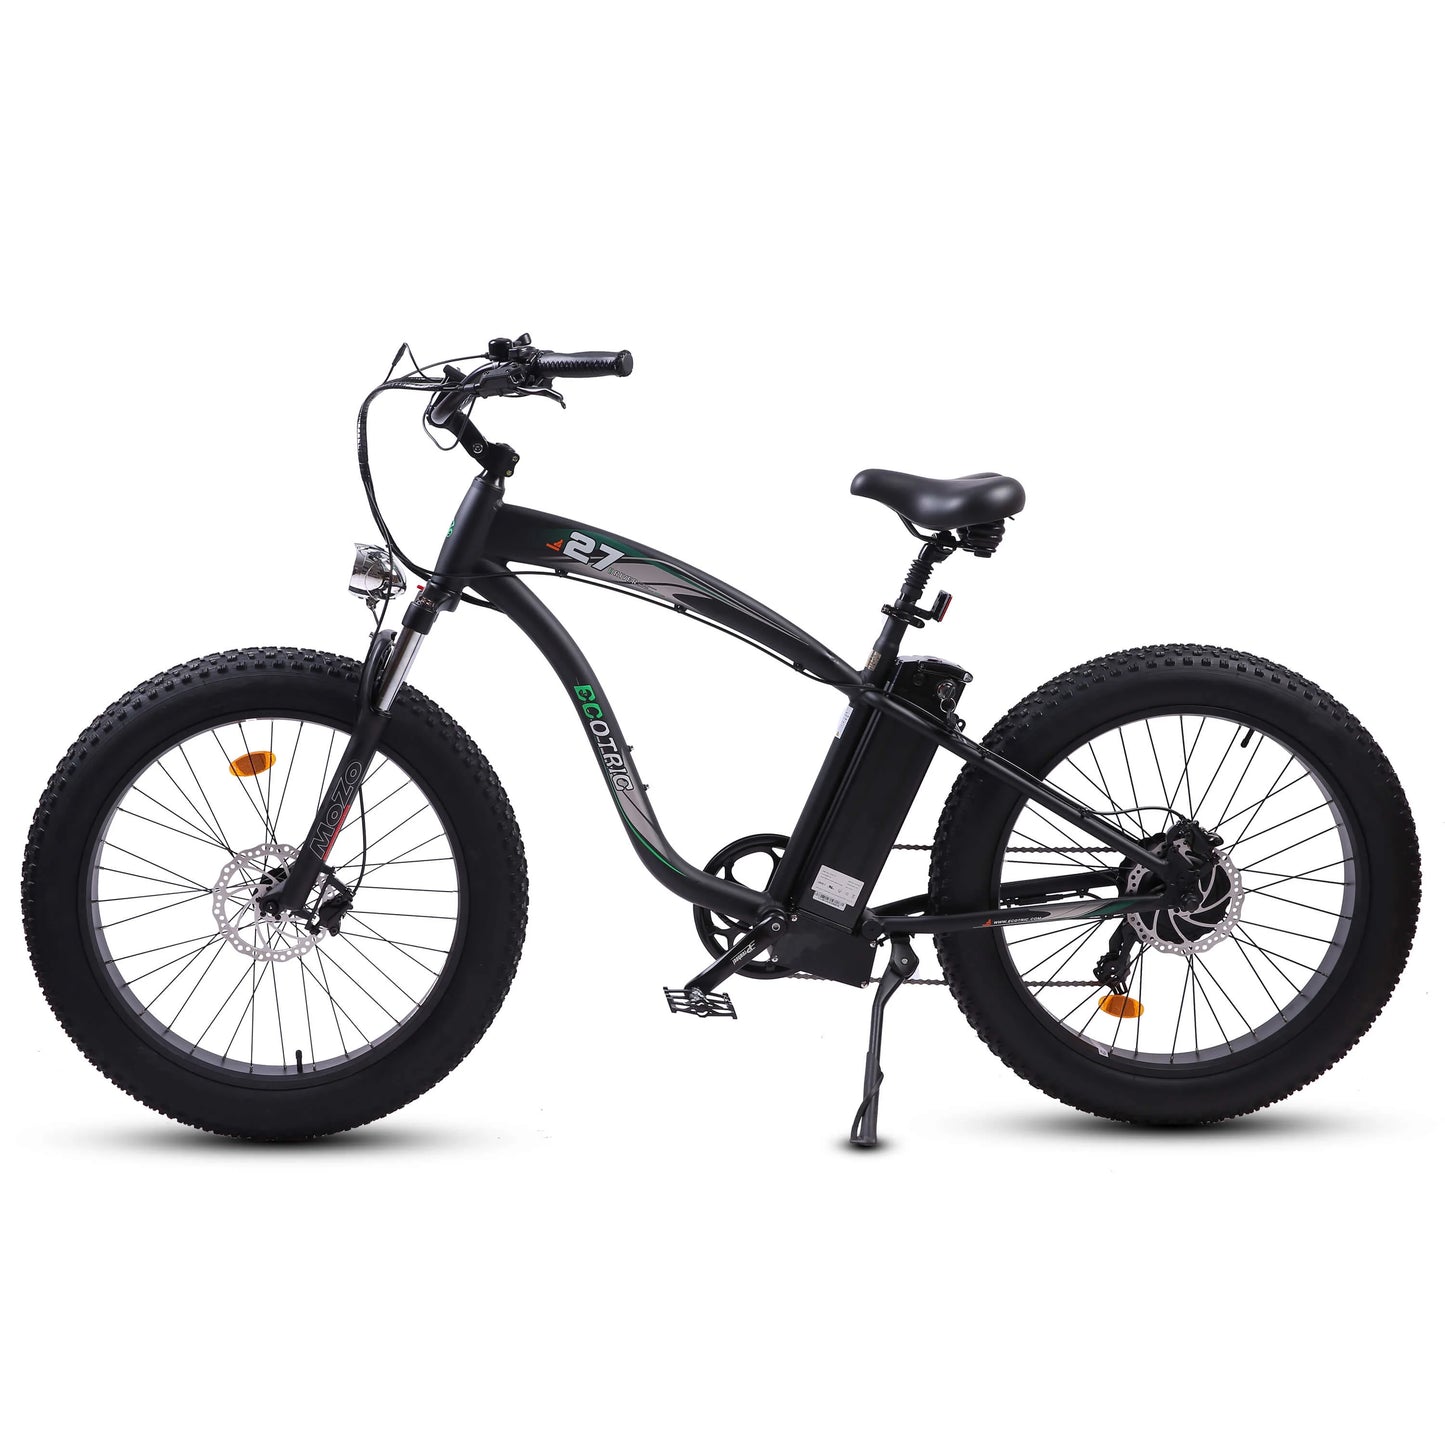 UL Certified-Ecotric Hammer Electric Fat Tire Beach Snow Bike 27, Top Speed: 25 MPH